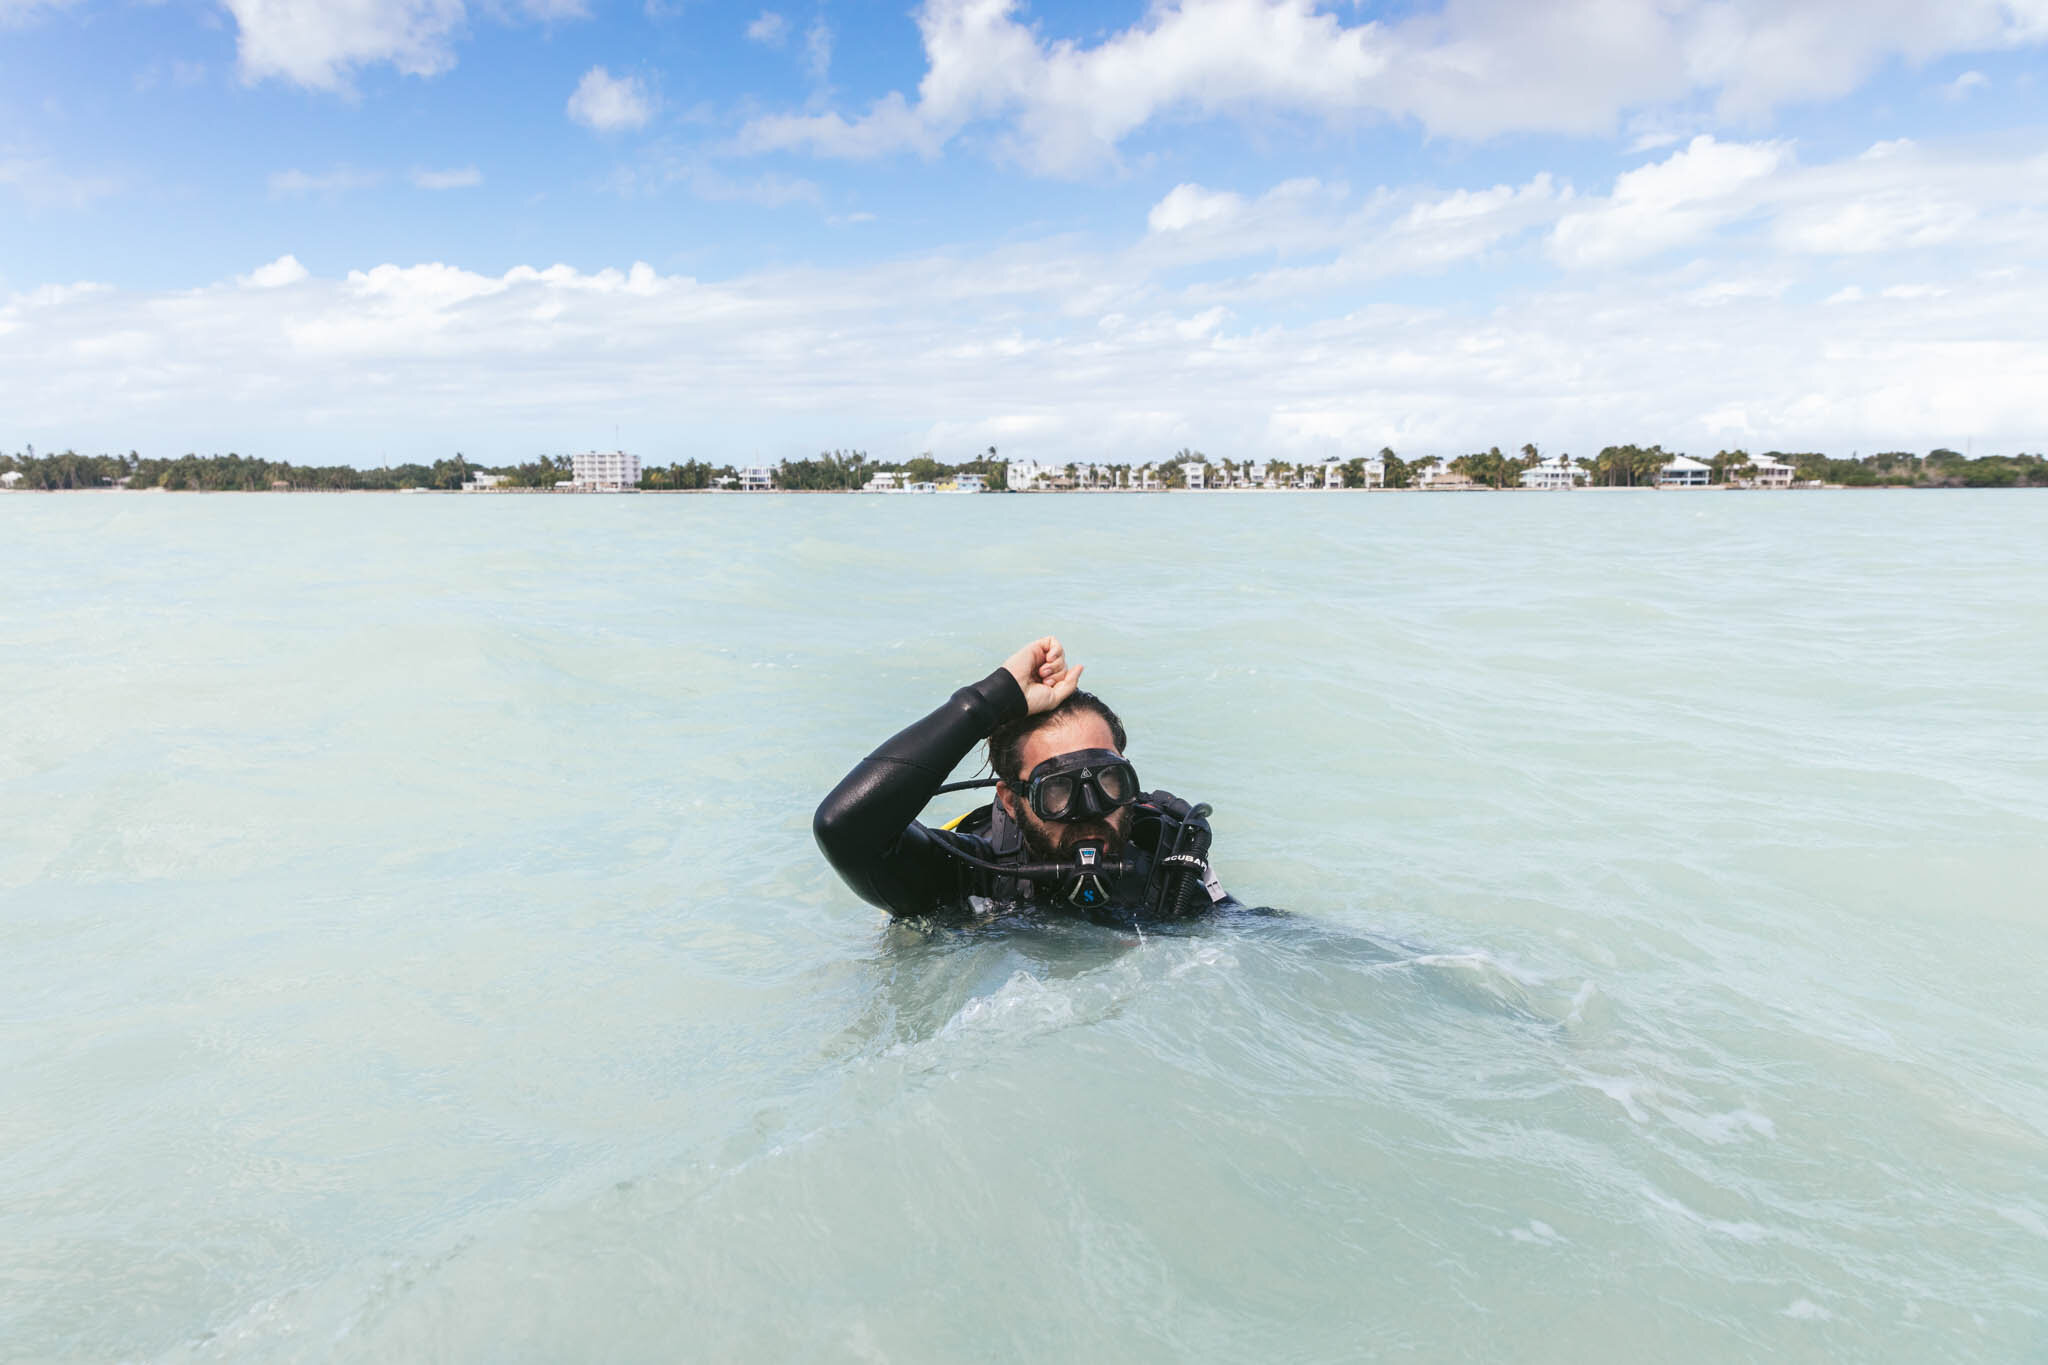  Man In Scuba Gear About To Dive Under The Crystal Clear Florida Waters Of The Atlantic Ocean Off The Islands Of Islamorada’s Private Beach. 